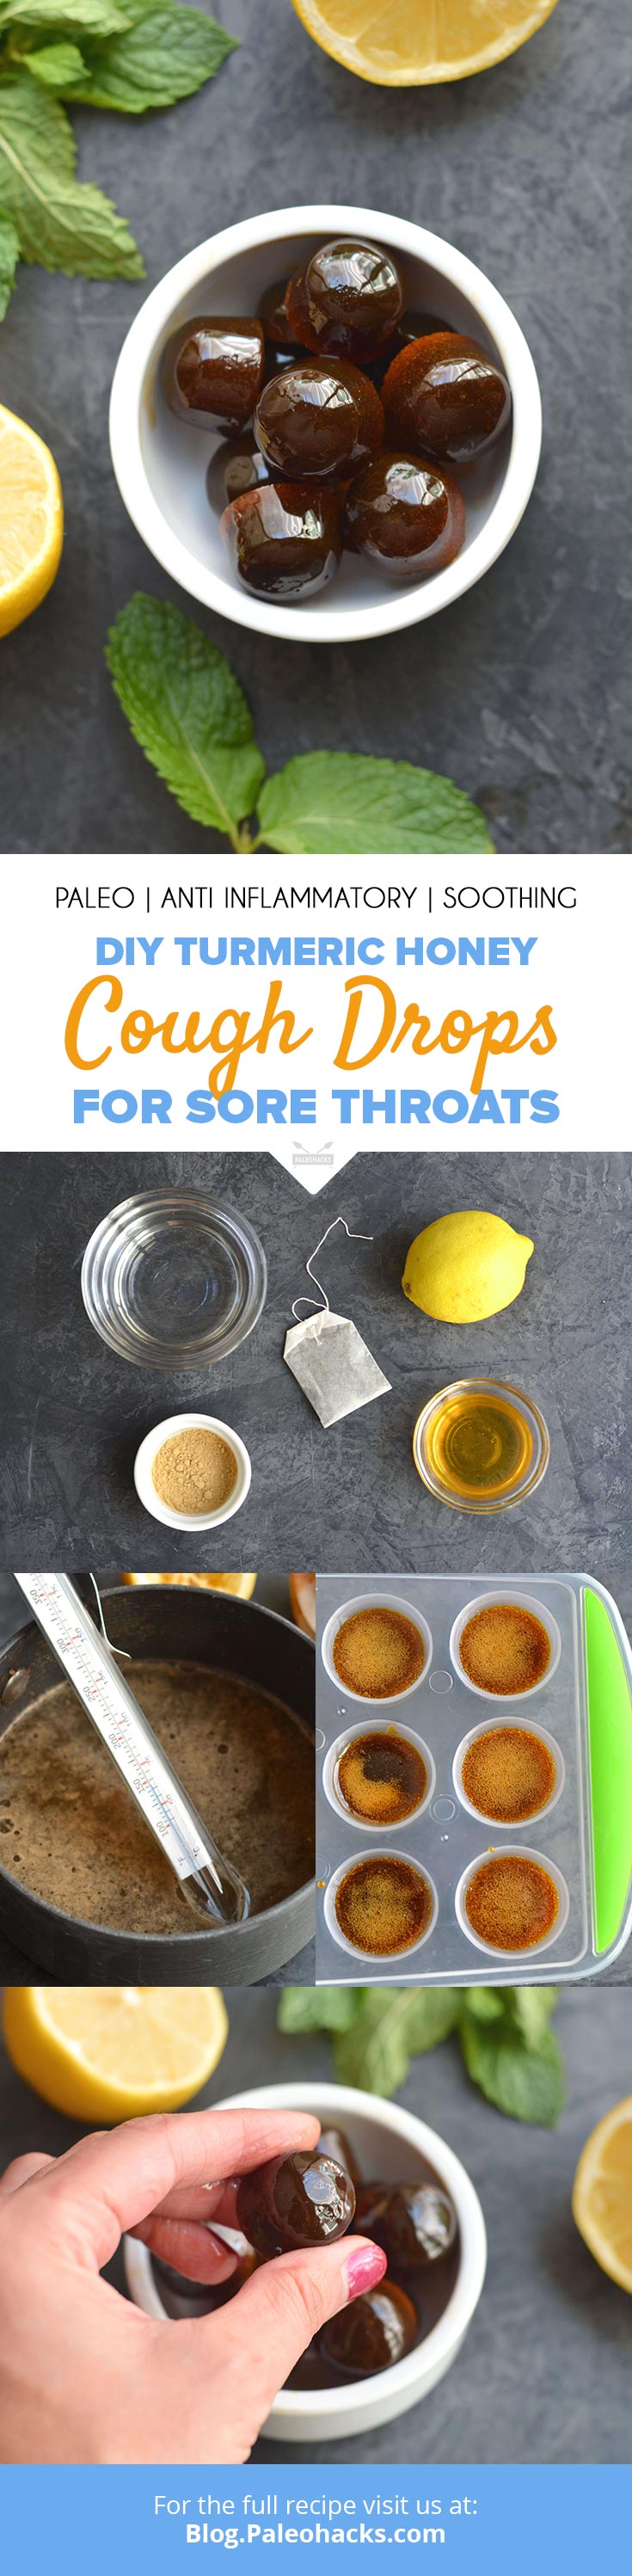 If you’re prone to a sore, scratchy throat, look no further than these homemade cough drops with anti-inflammatory ingredients like honey, lemon & turmeric.